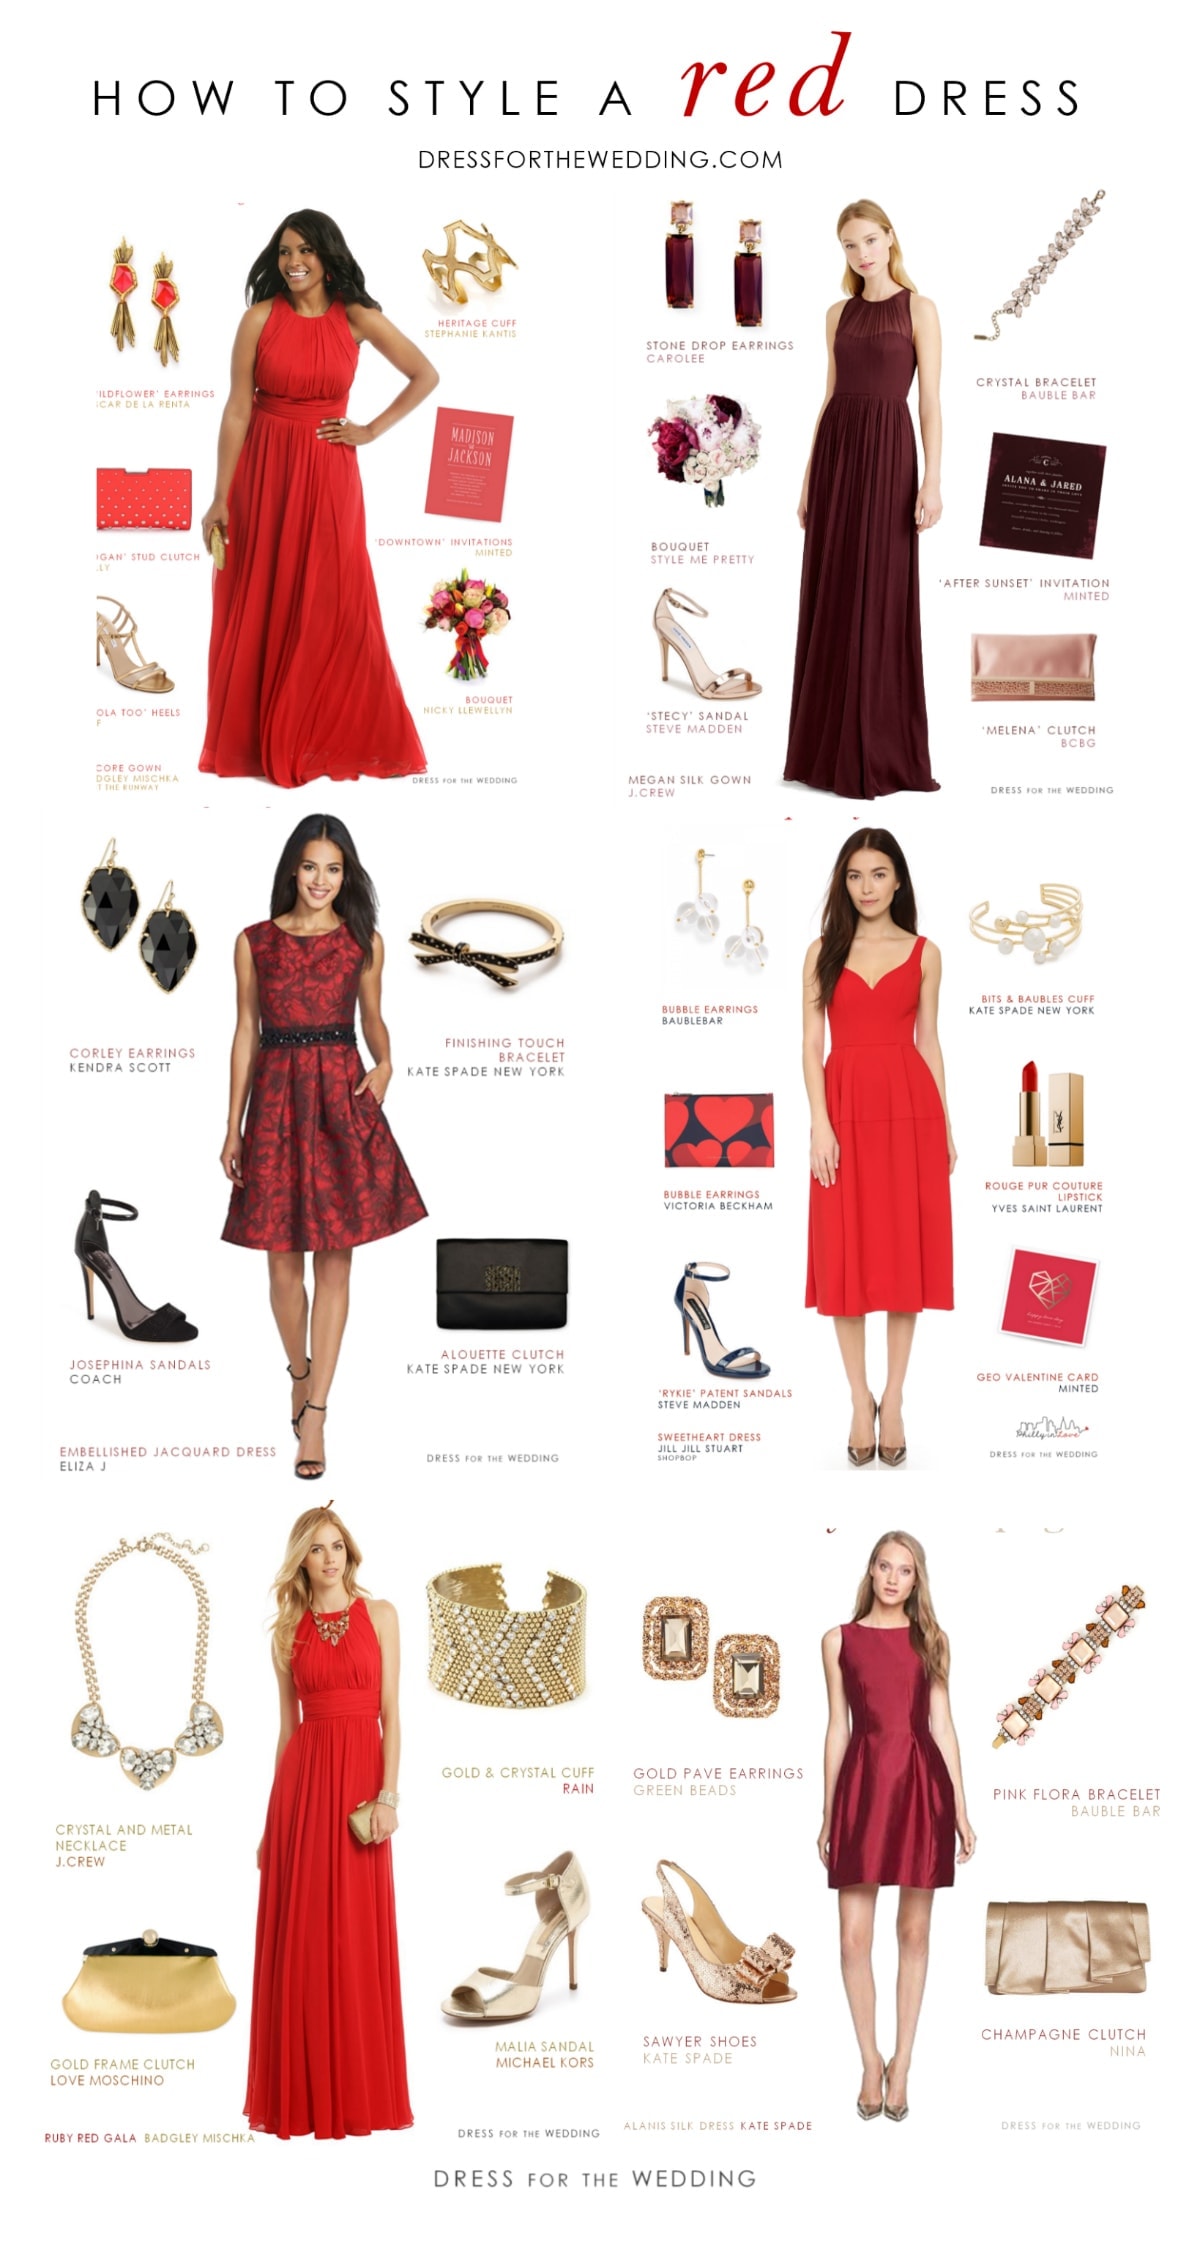 Red Maxi Dress, Red Maxi Dress, Womens Day Wear Clothing, Plus